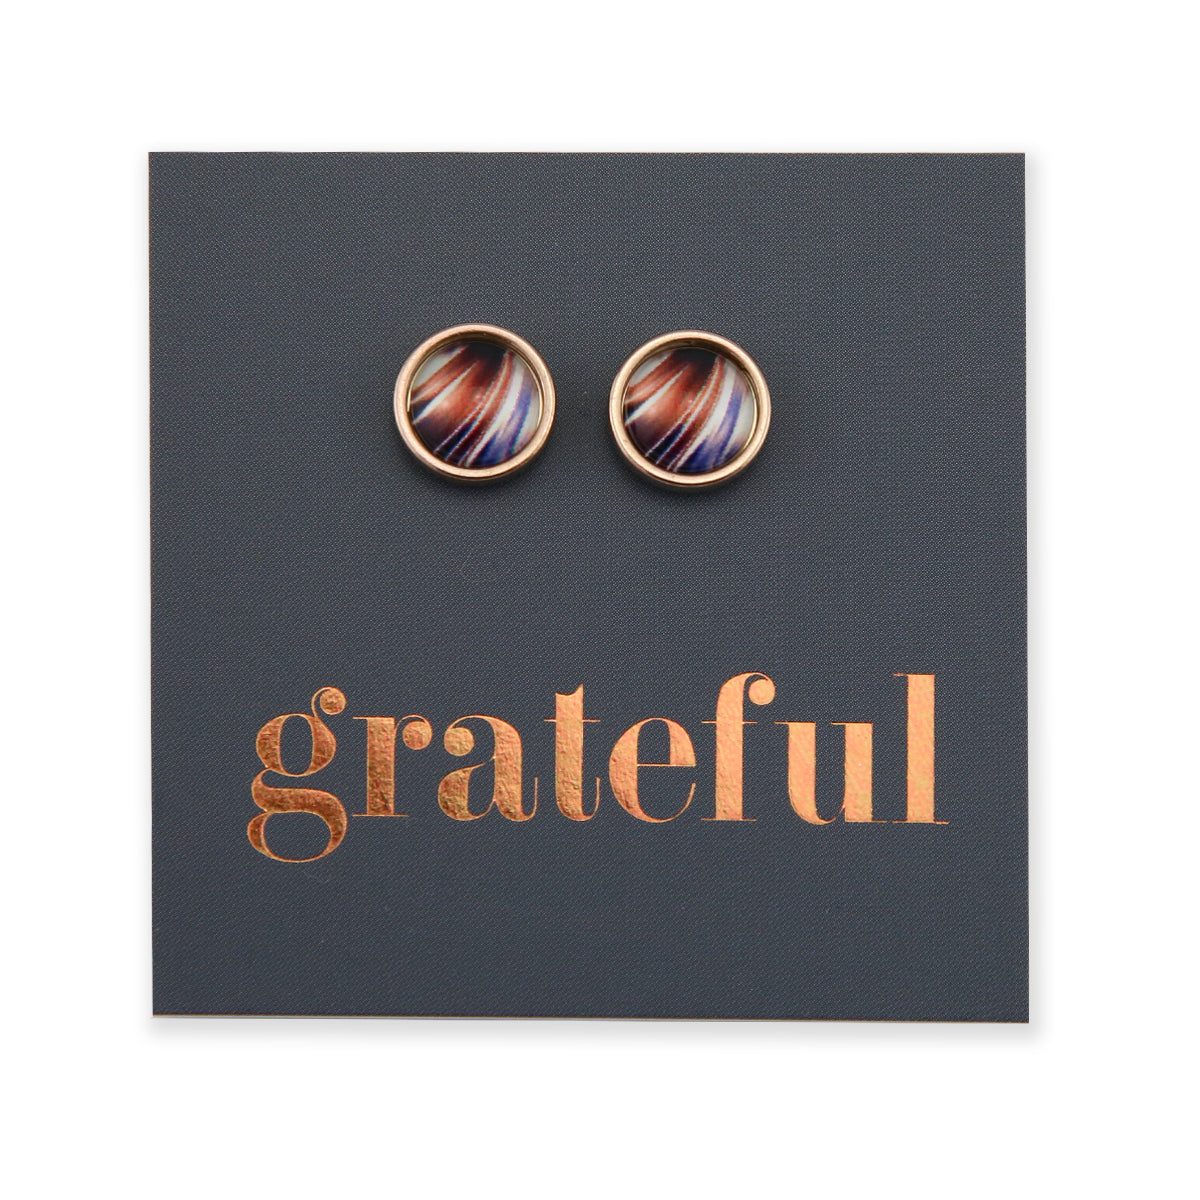 Beautiful rose gold stainless steel circle stud hypoallergenic earrings with metallic print on grateful gift card.     